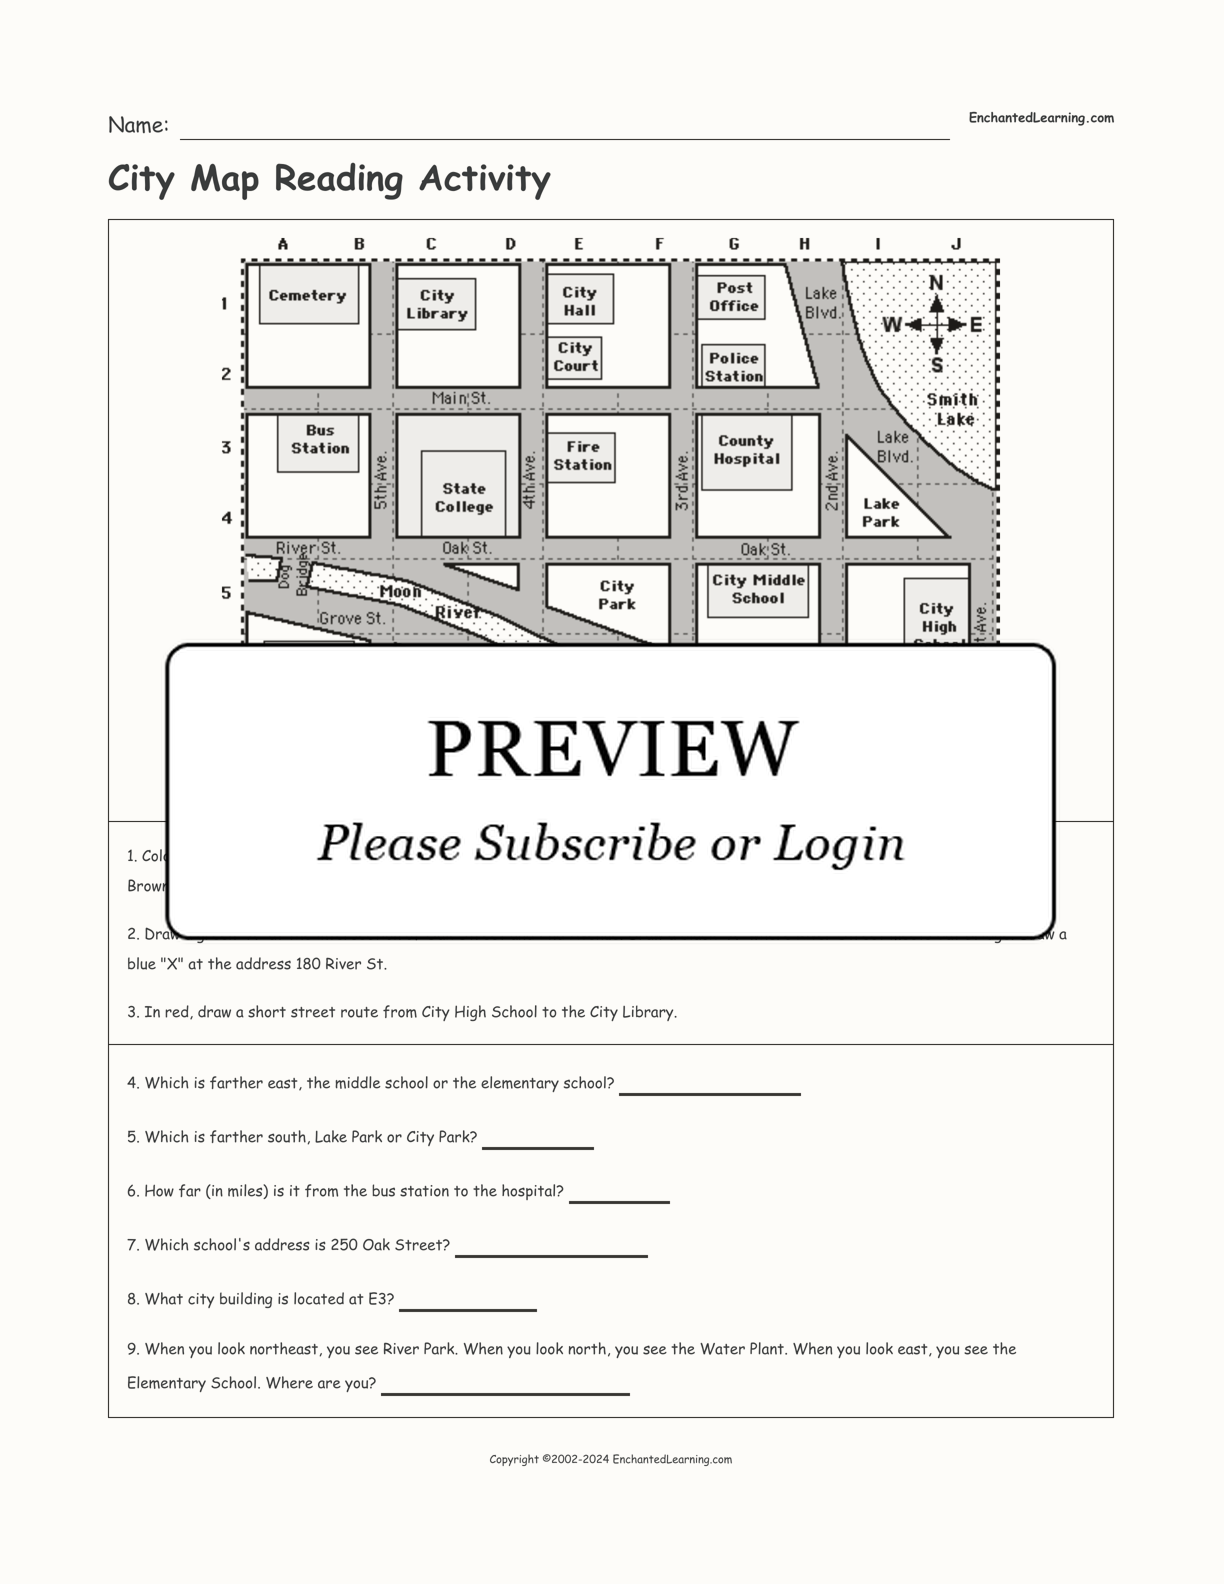 City Map Reading Activity interactive worksheet page 1